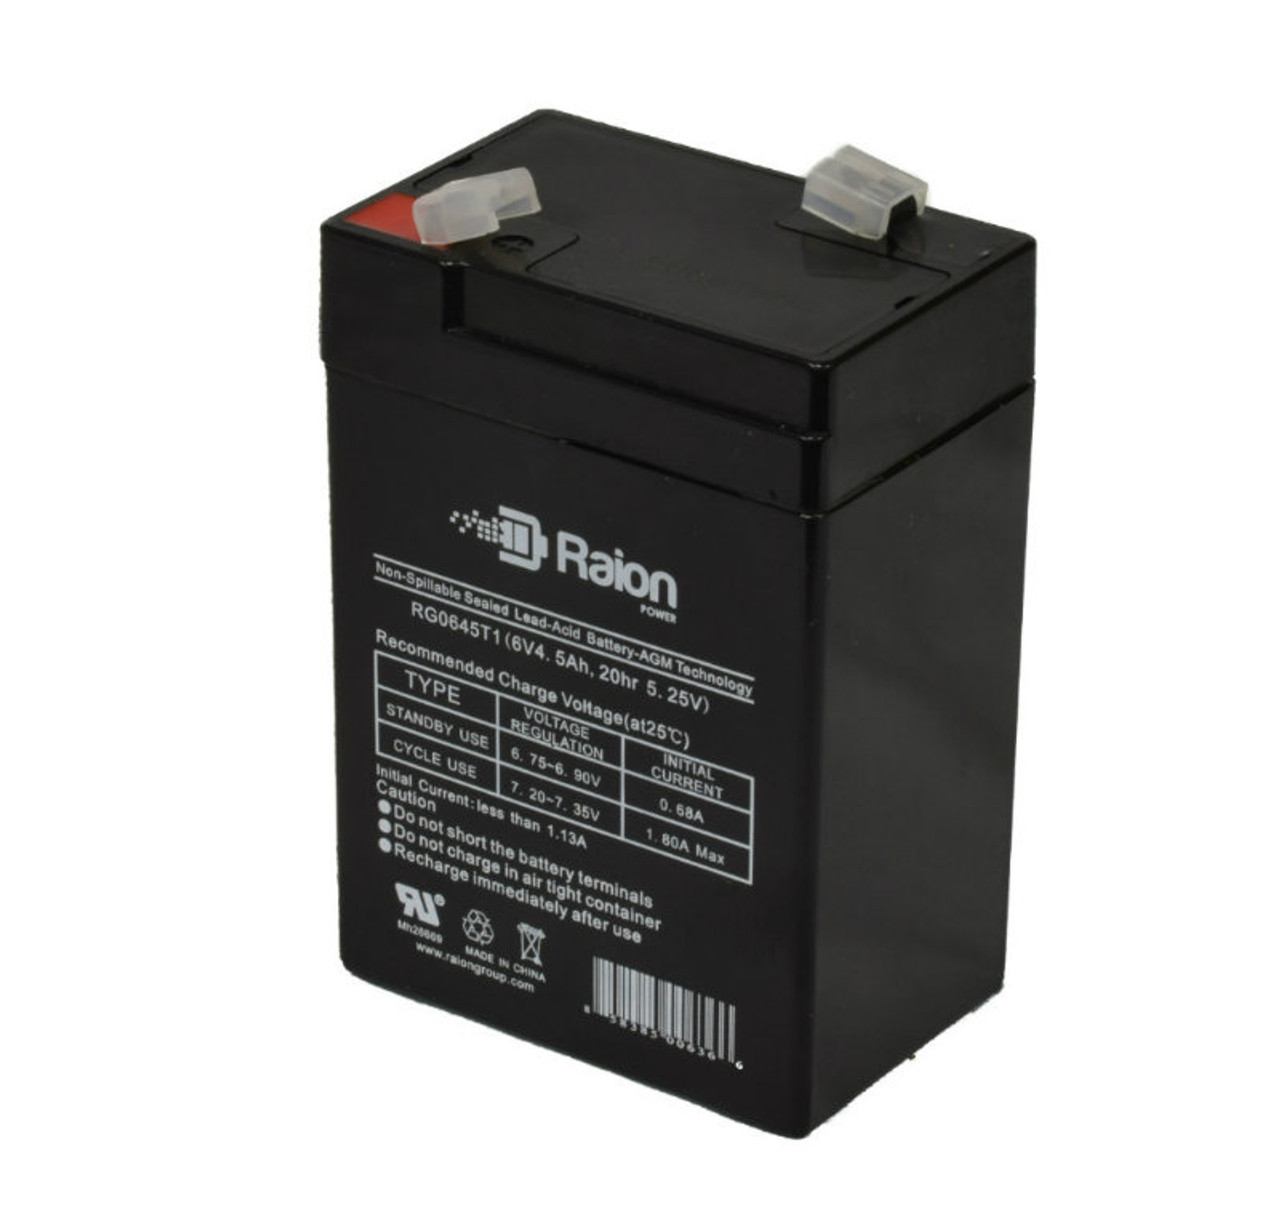 Raion Power RG0645T1 6V 4.5Ah Replacement Battery Cartridge for Consent GS64-5